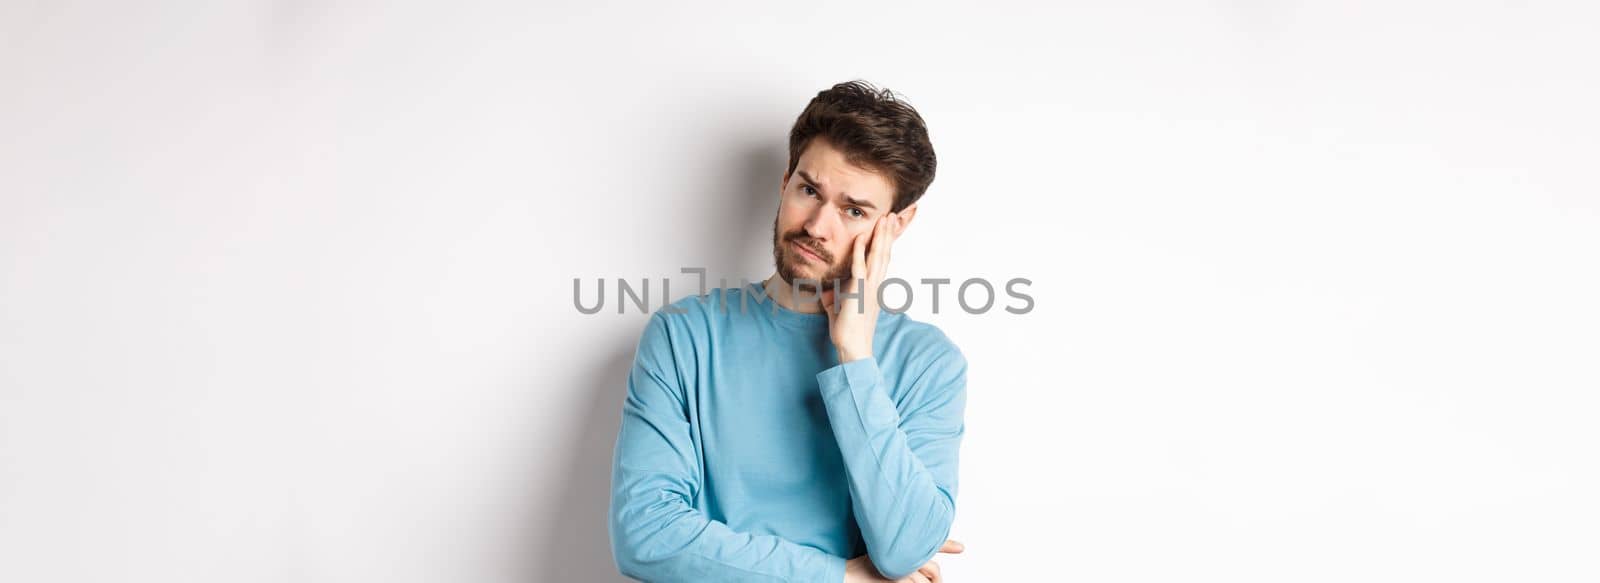 Sad young man looking frustrated, touching temple of head and frowning uneasy, standing against white background.